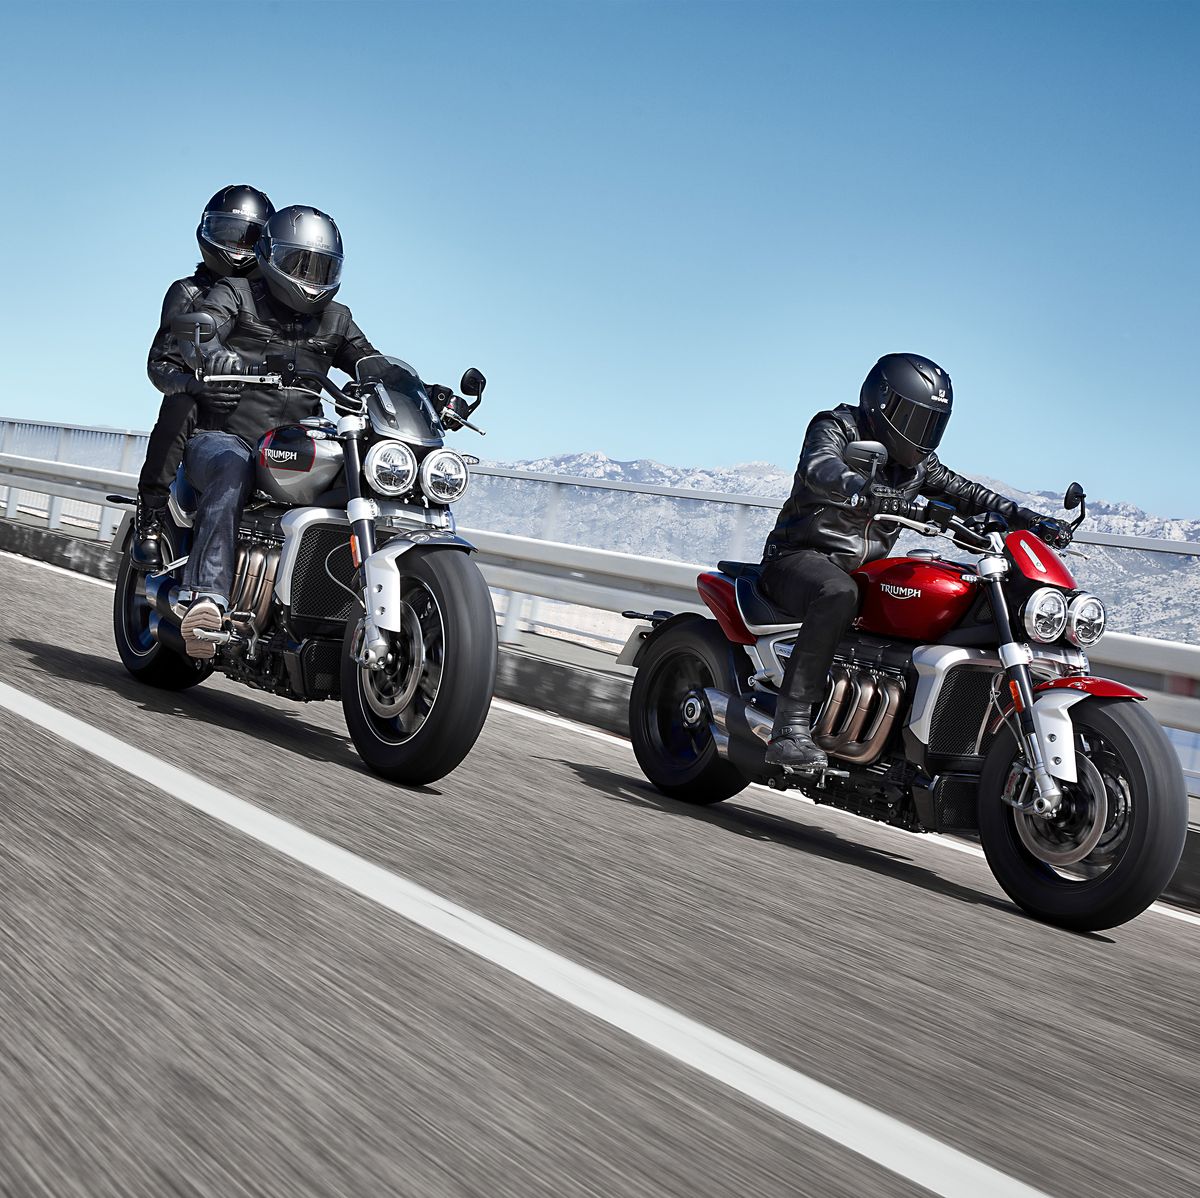 The 10 Biggest Motorcycles You Can Buy